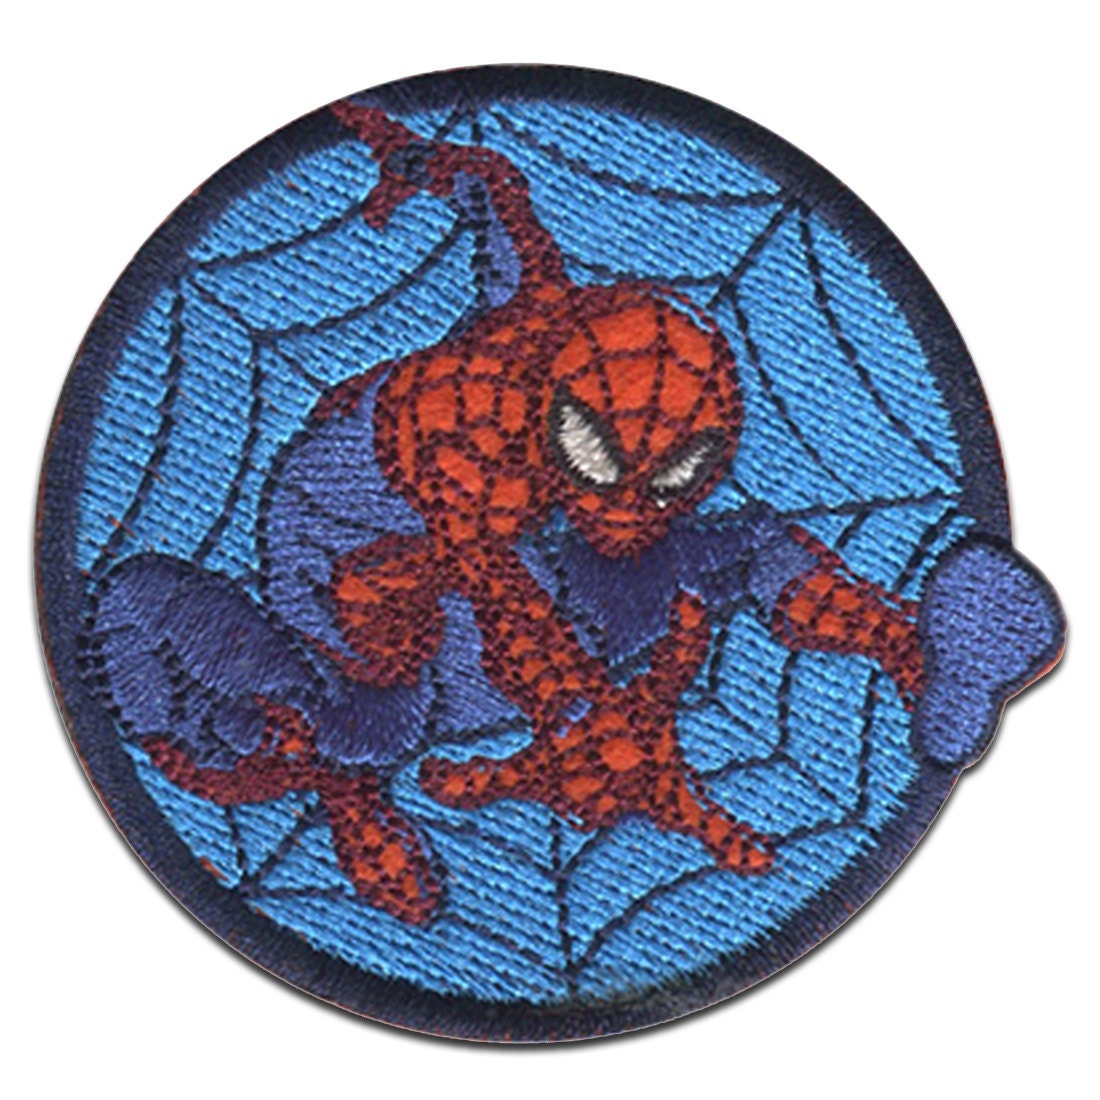 Marvel © Spiderman Comic Spider Web Button Iron on Patches, Size 2